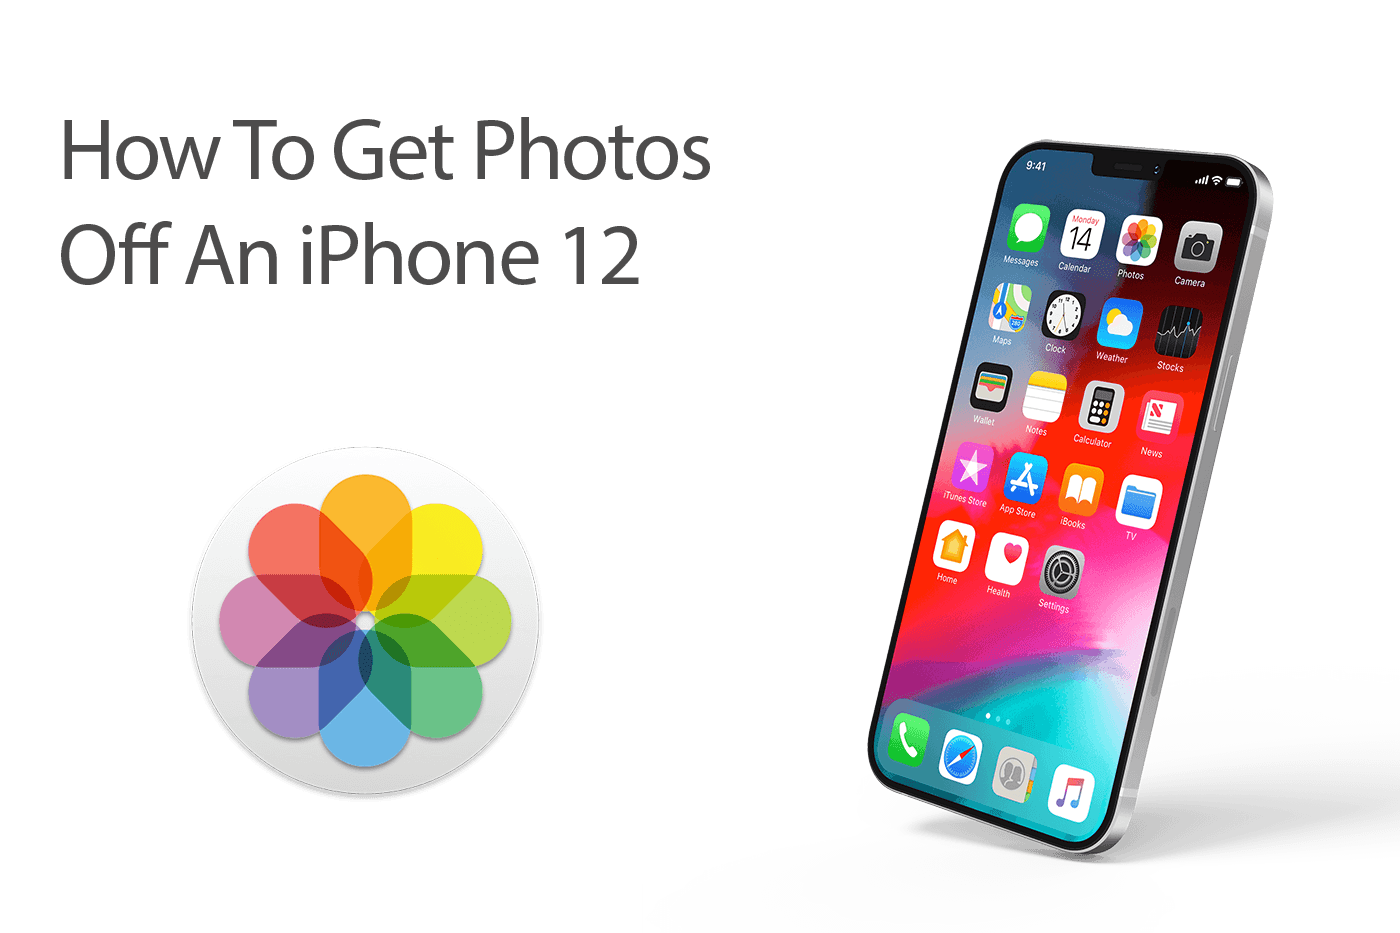 How To Get Photos Off An iPhone 12 on PC Or Mac